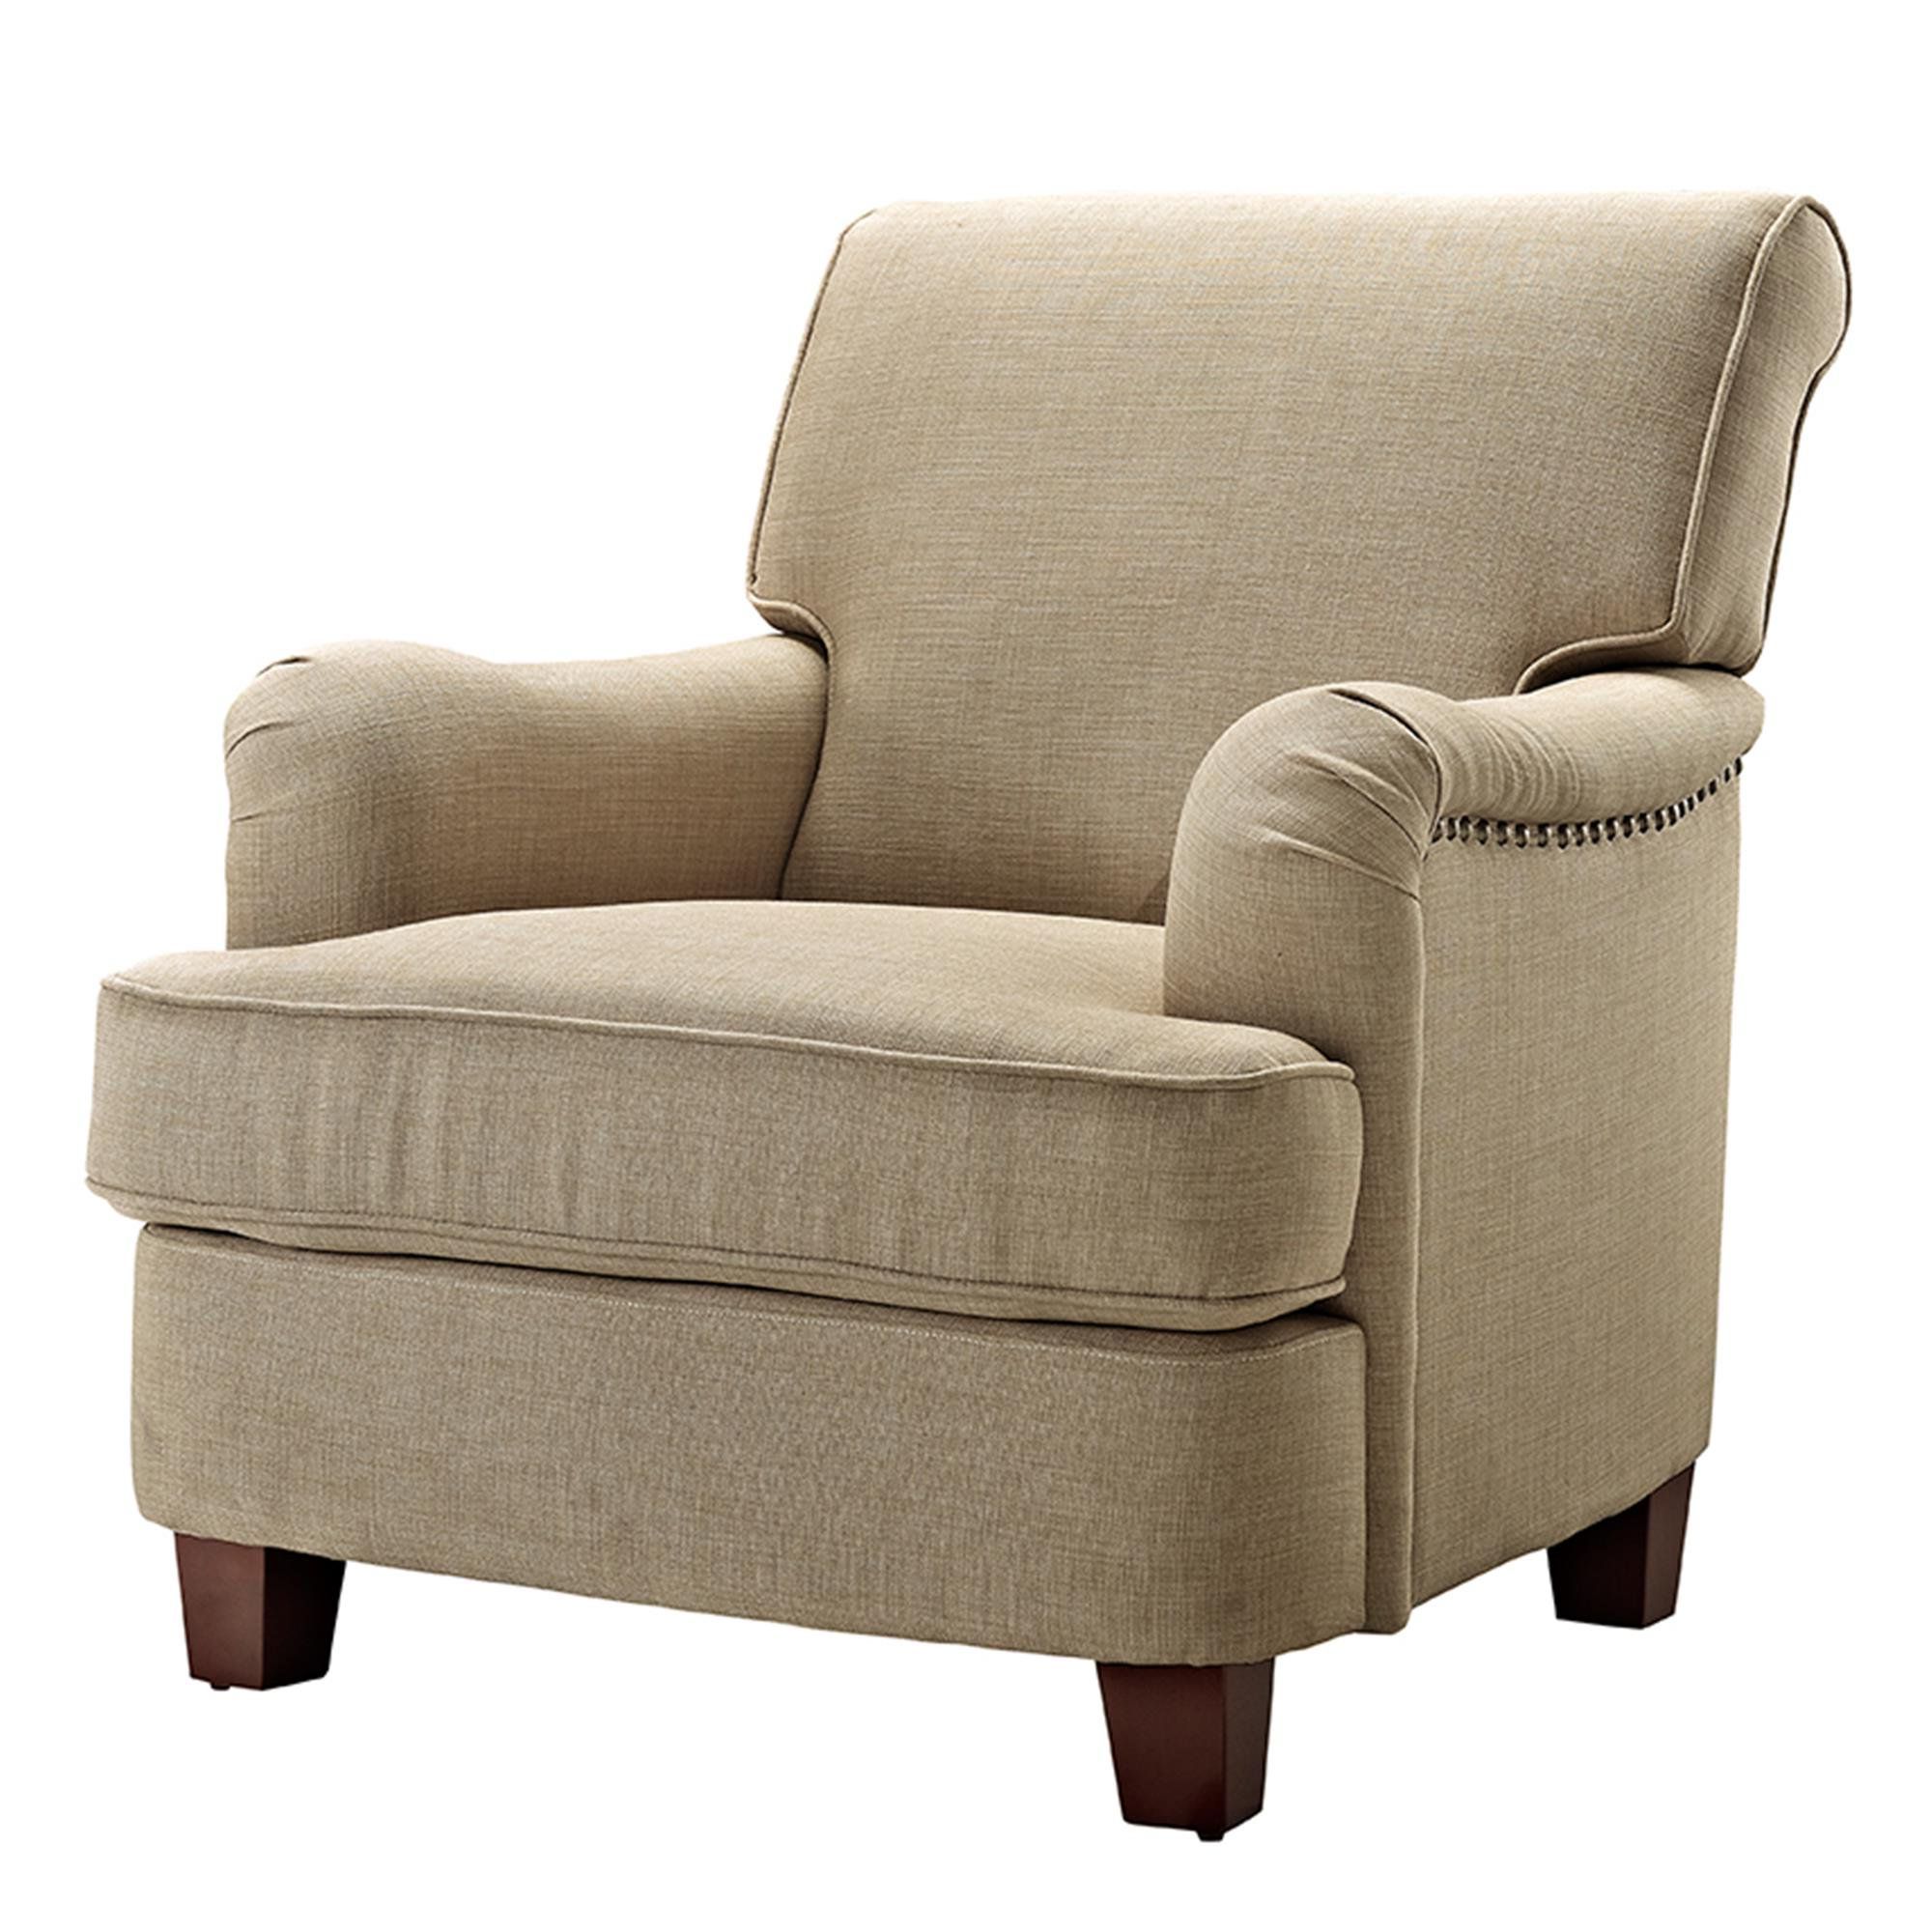 Asbury Club Chairs For Widely Used Better Homes & Gardens Grayson Upholstered Club Accent Chair (View 12 of 20)